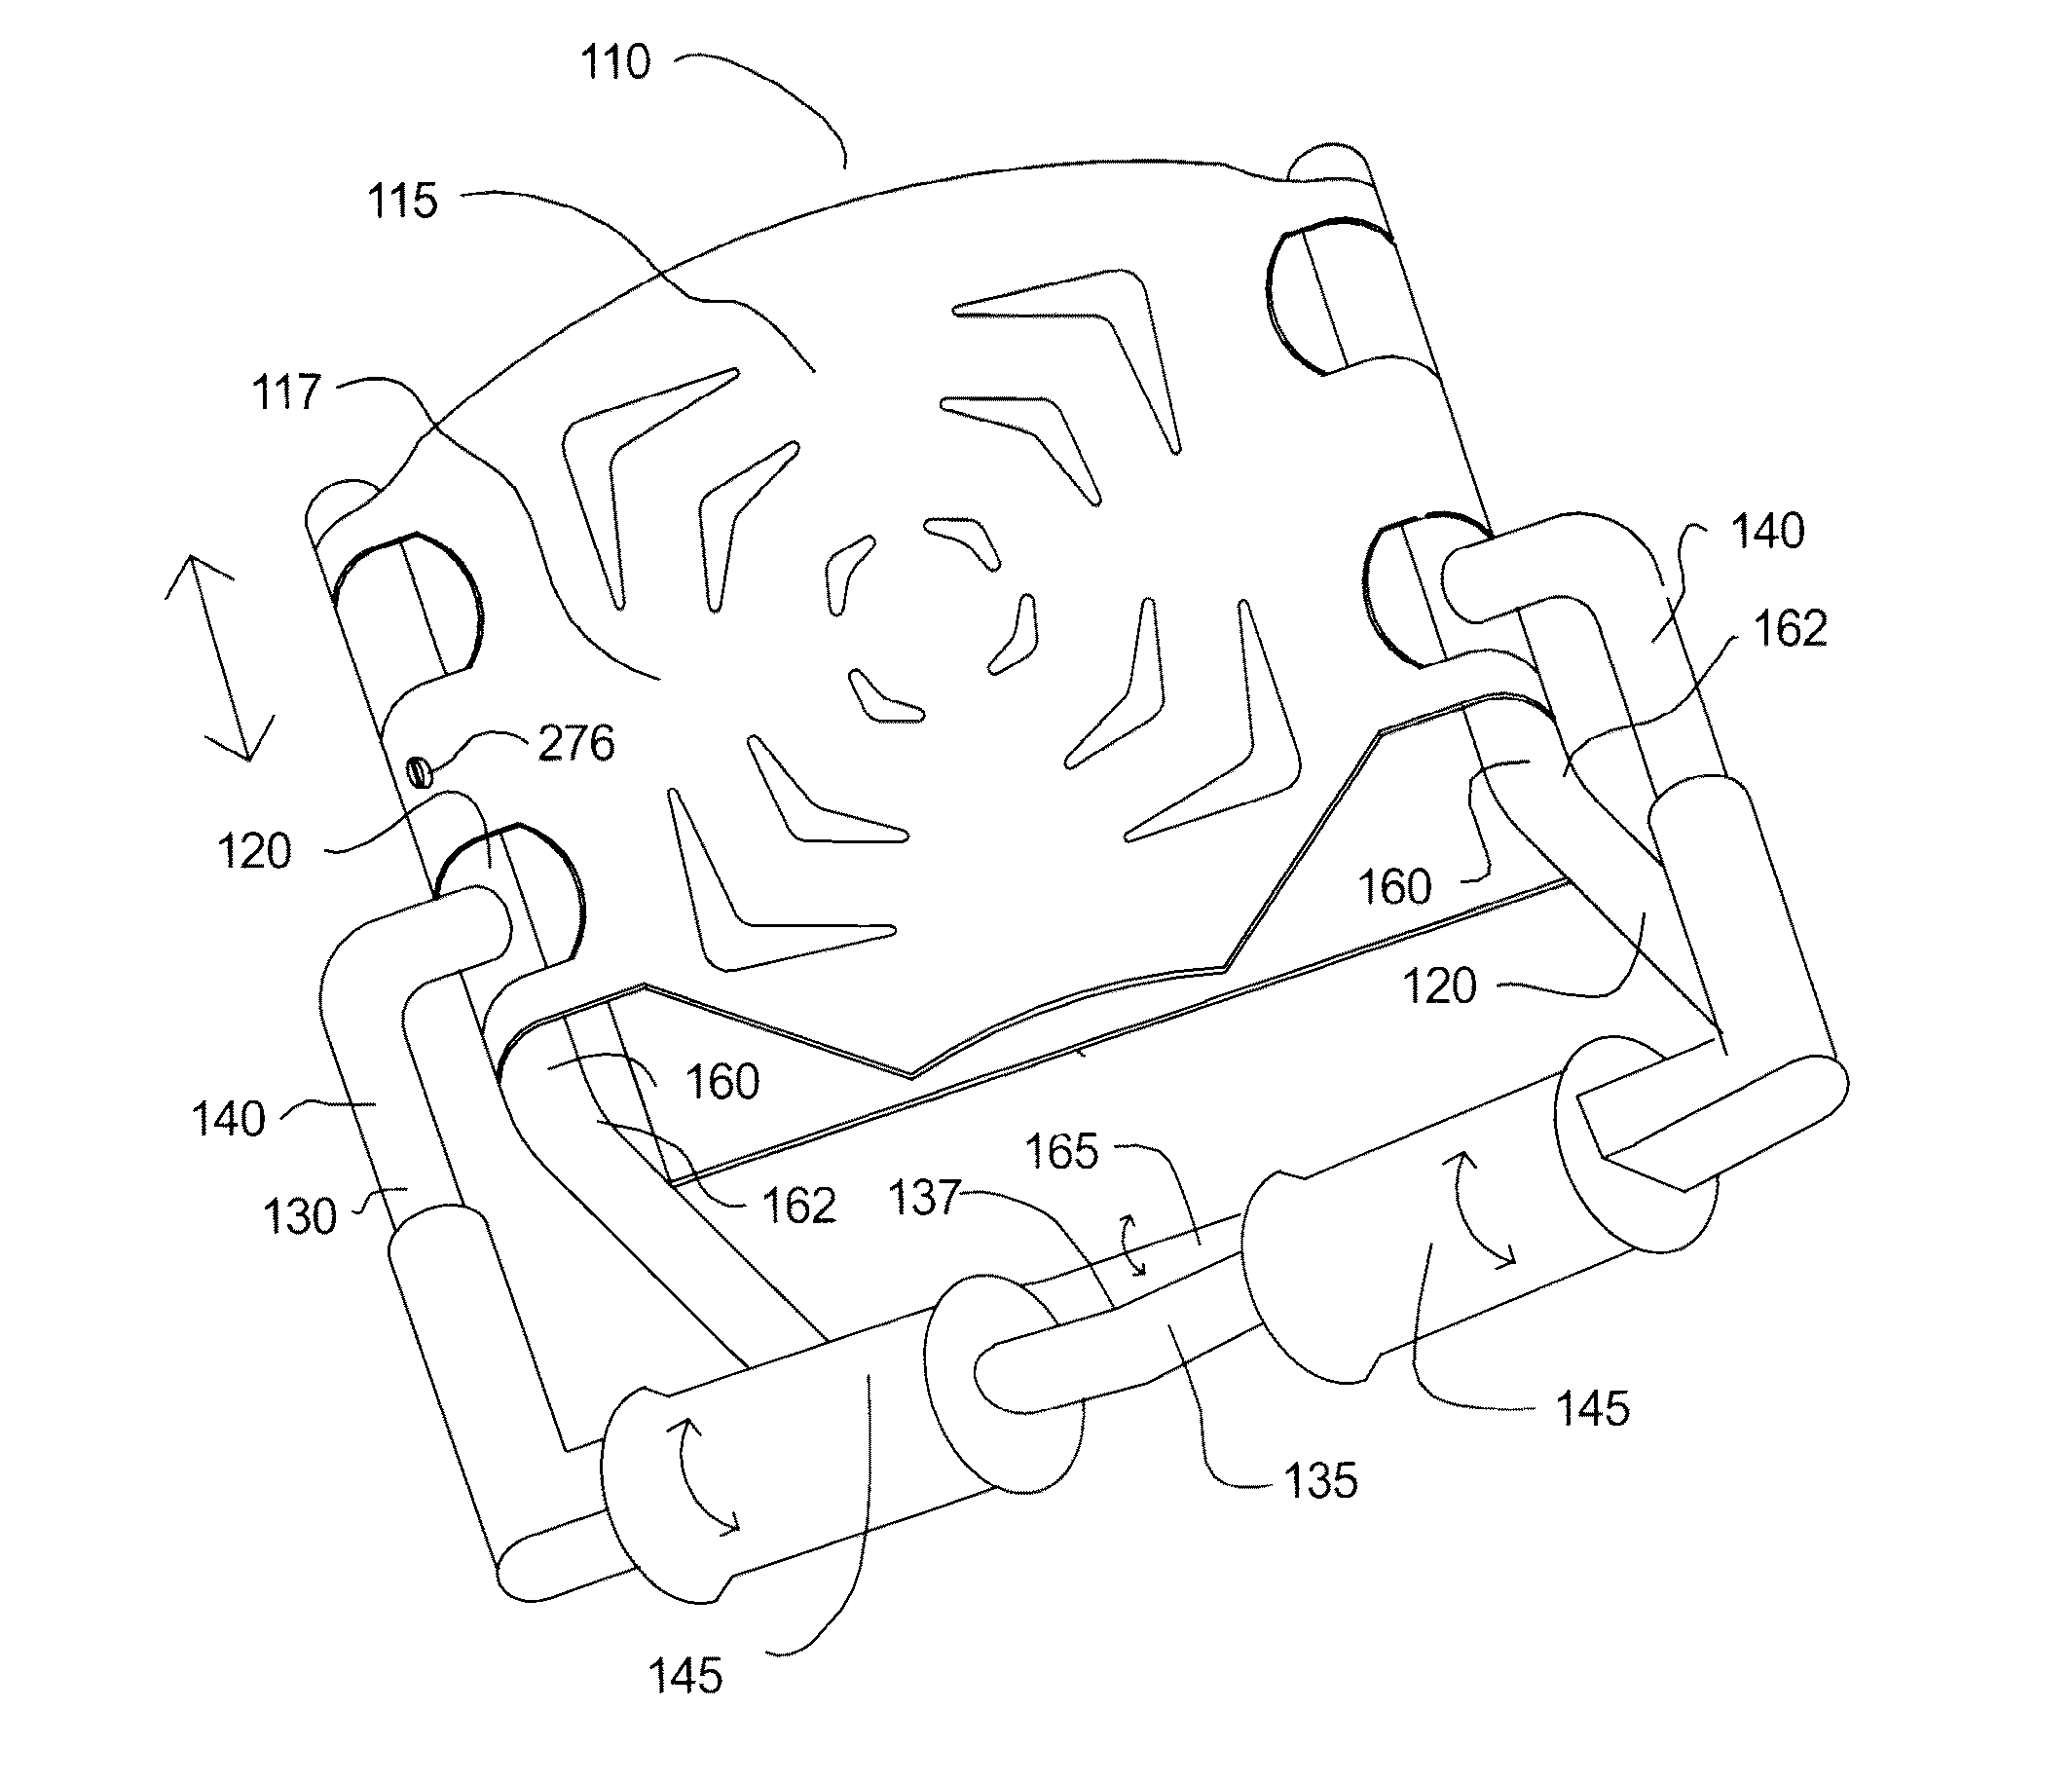 Platform for exercise apparatus and other devices